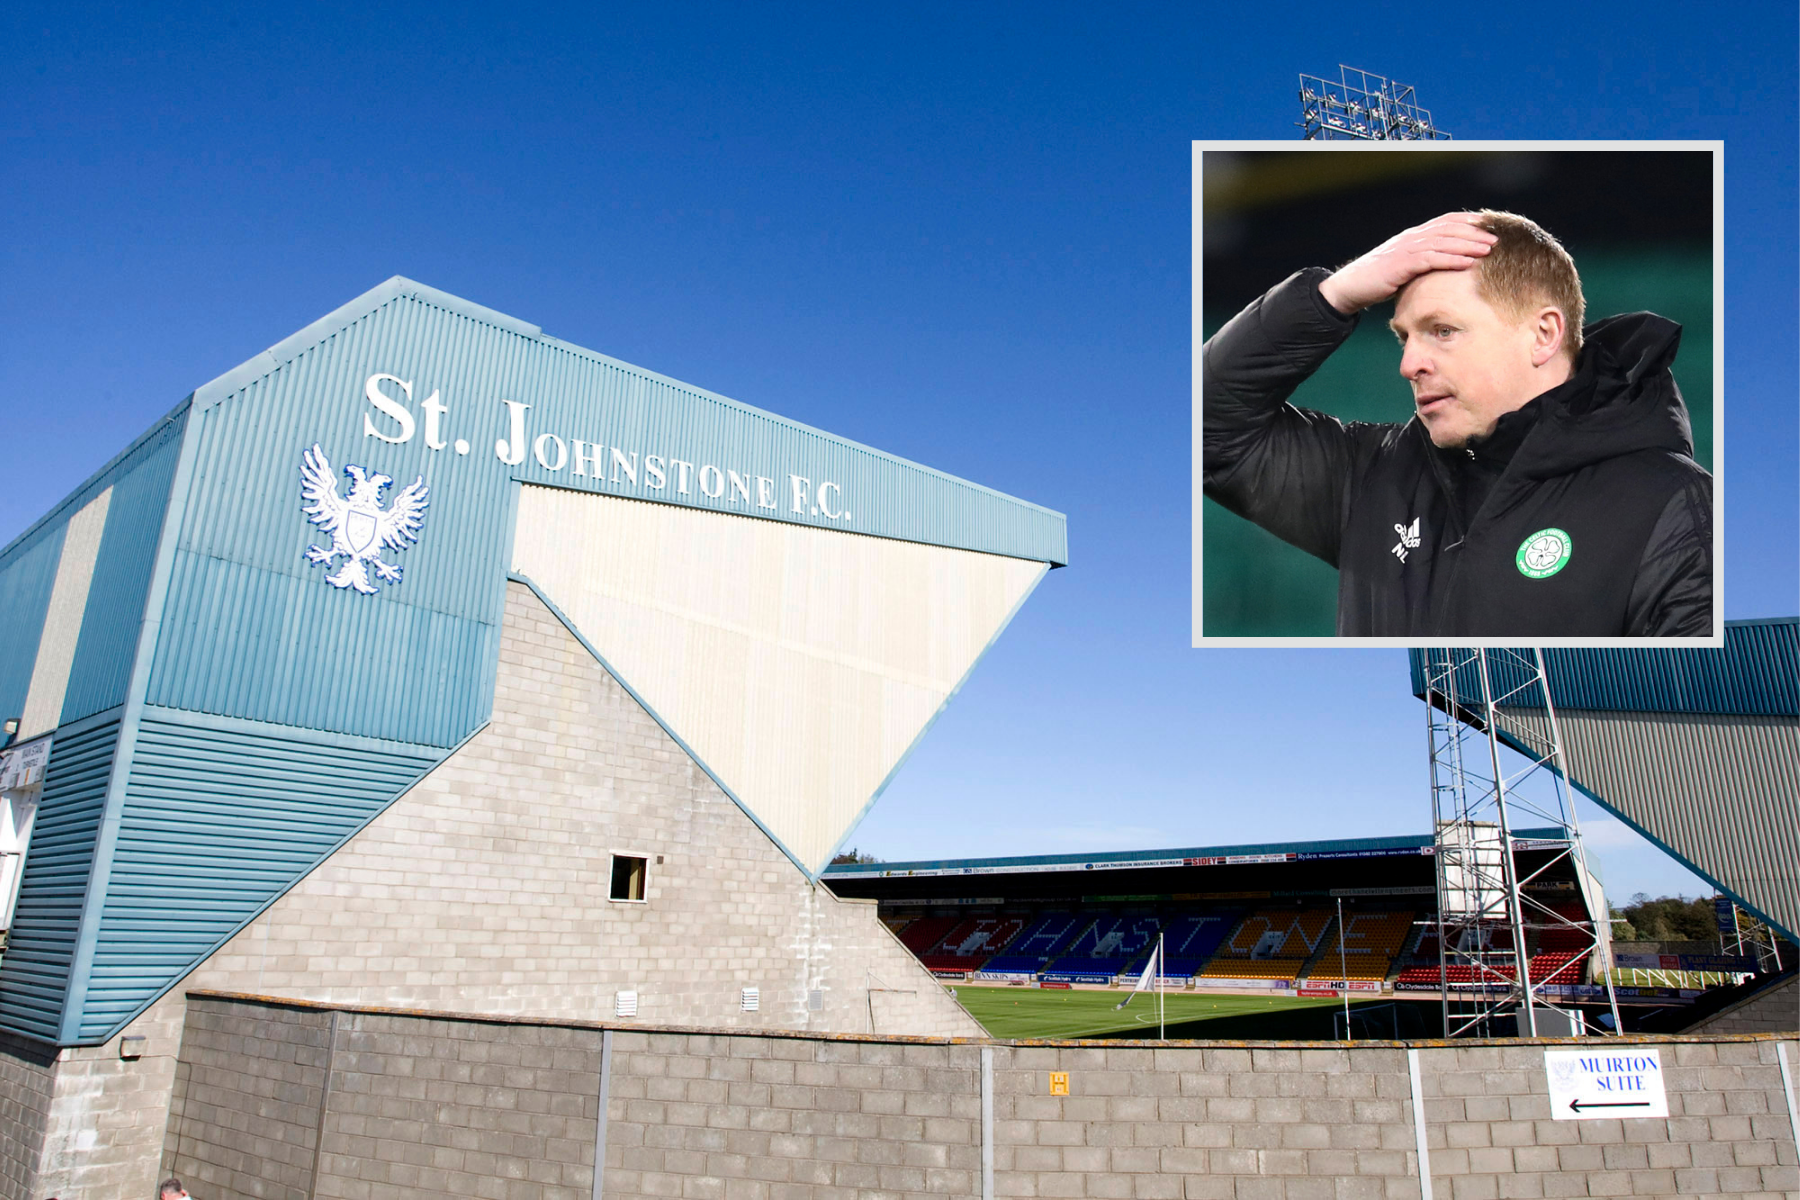 St Johnstone blast Celtic boss Neil Lennon over 'inaccurate and unfounded' comments